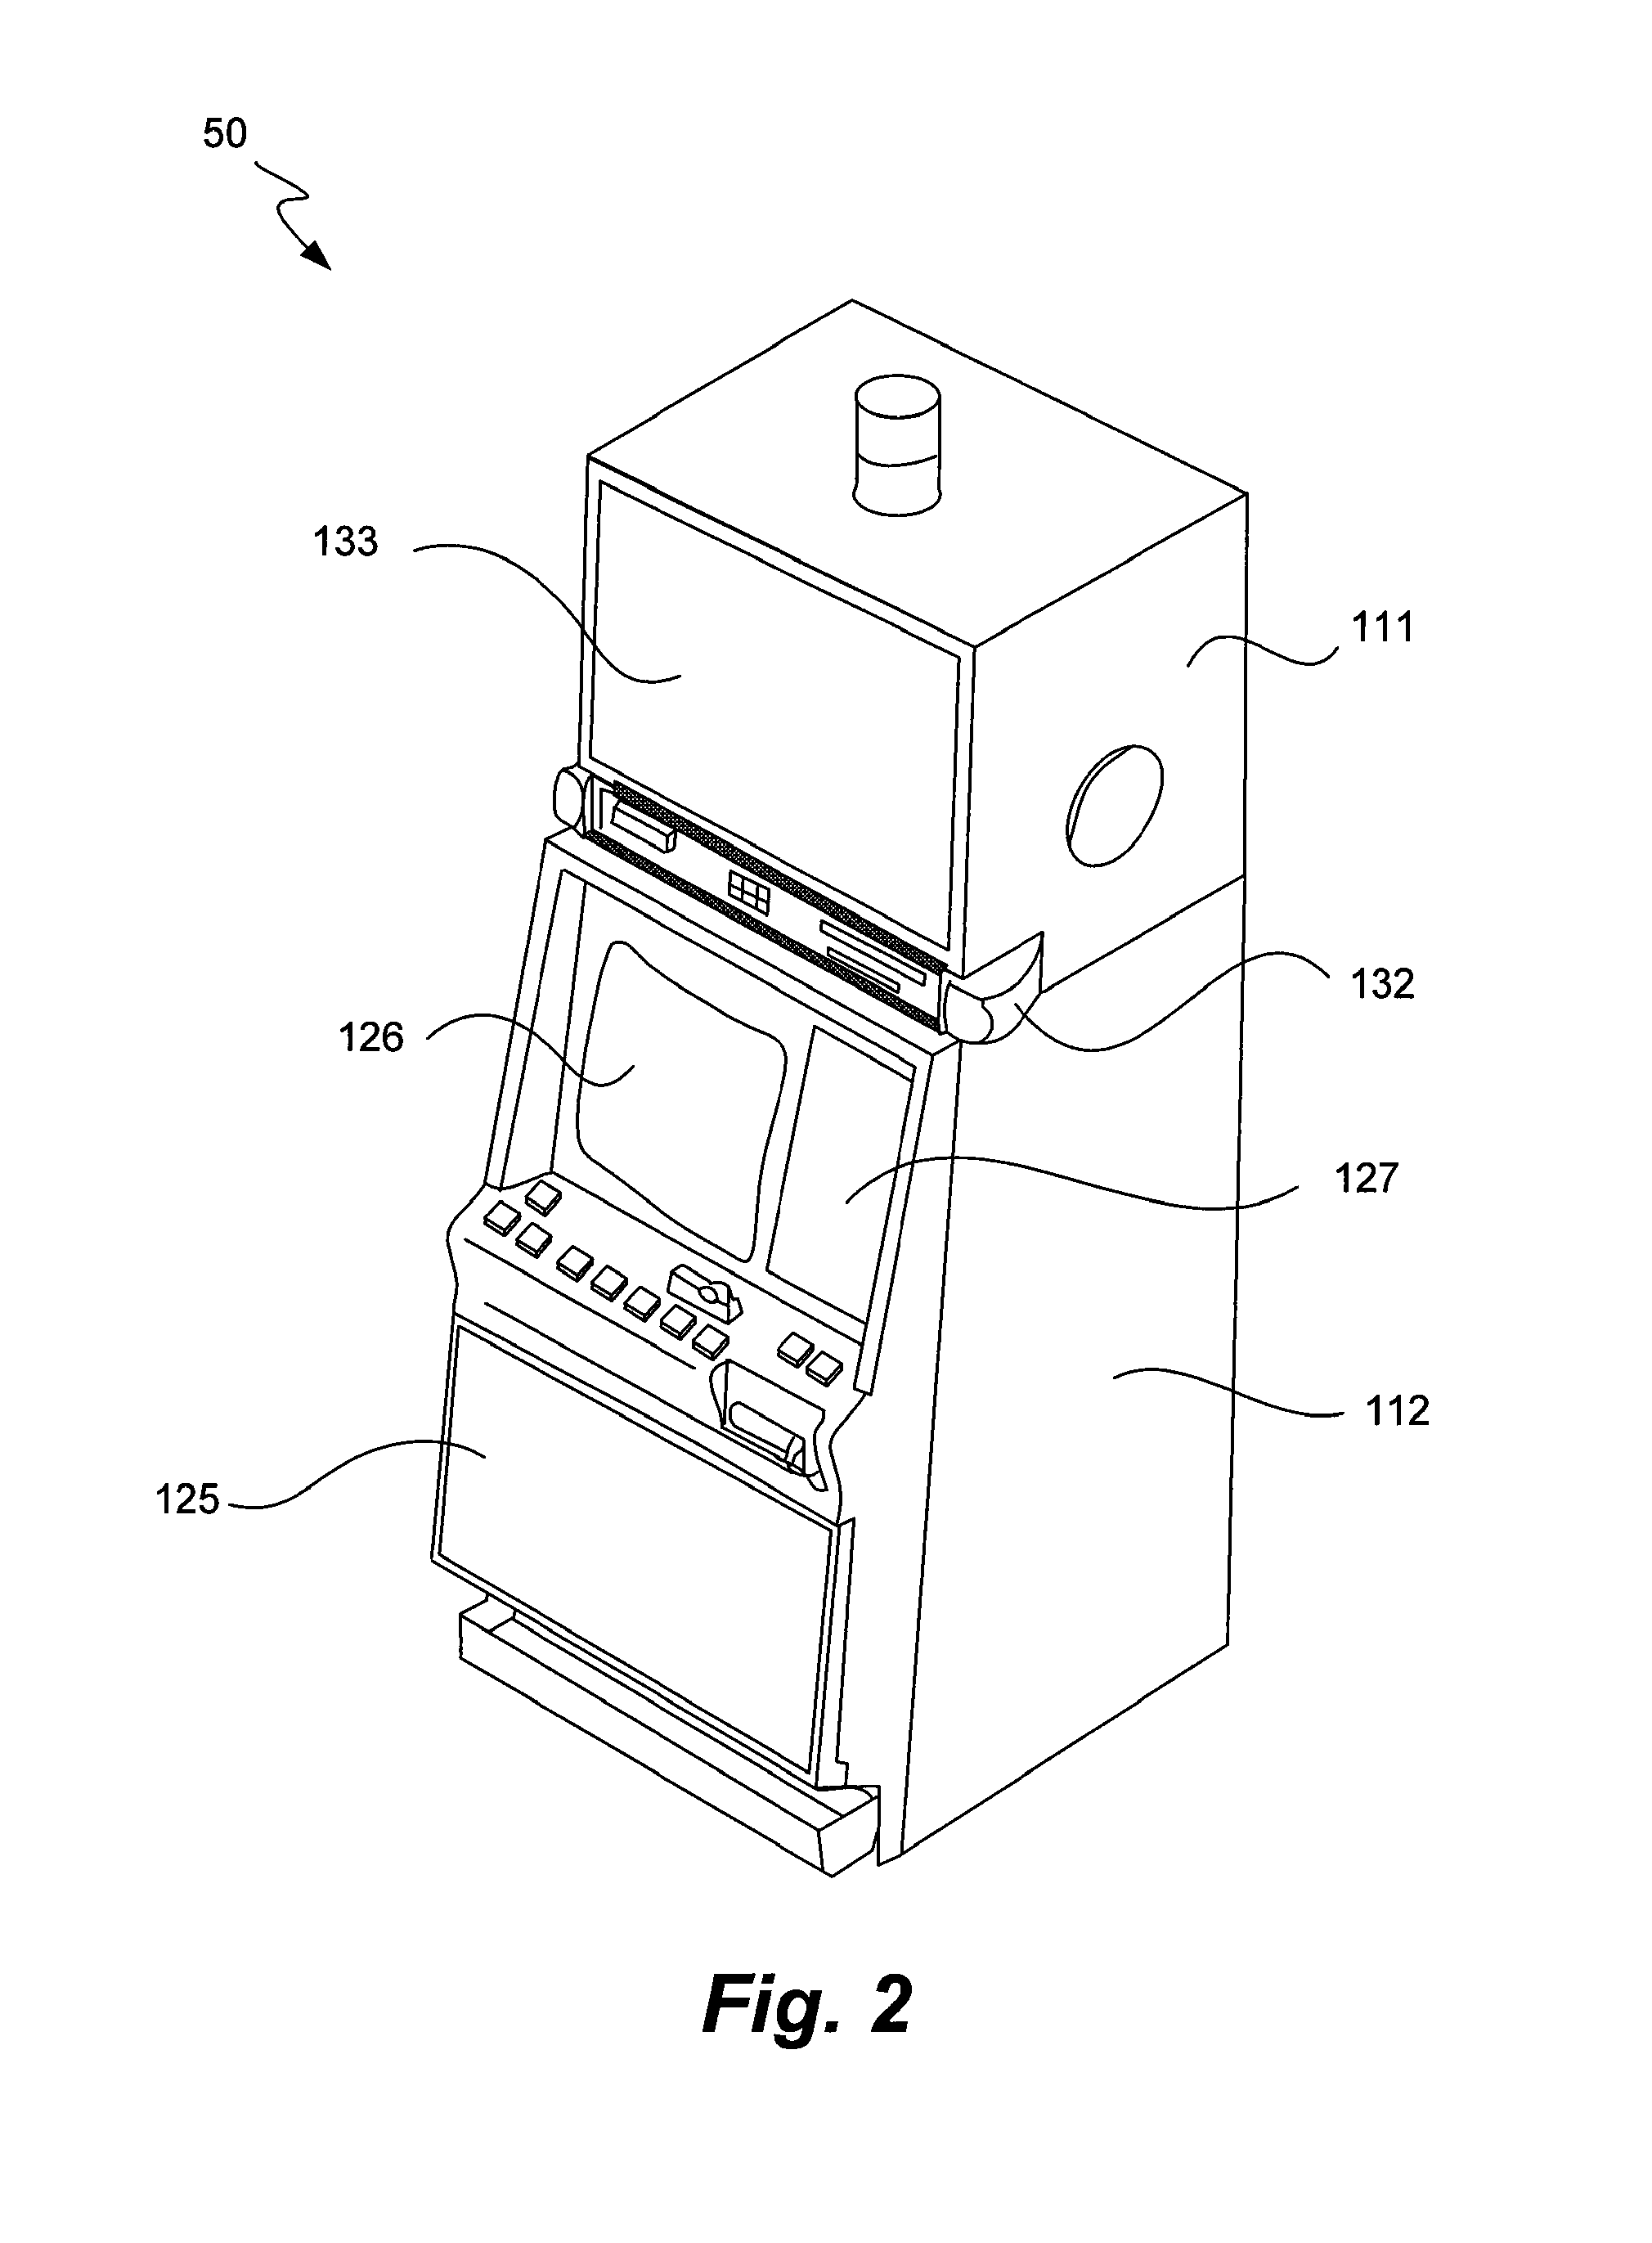 Casino display methods and devices